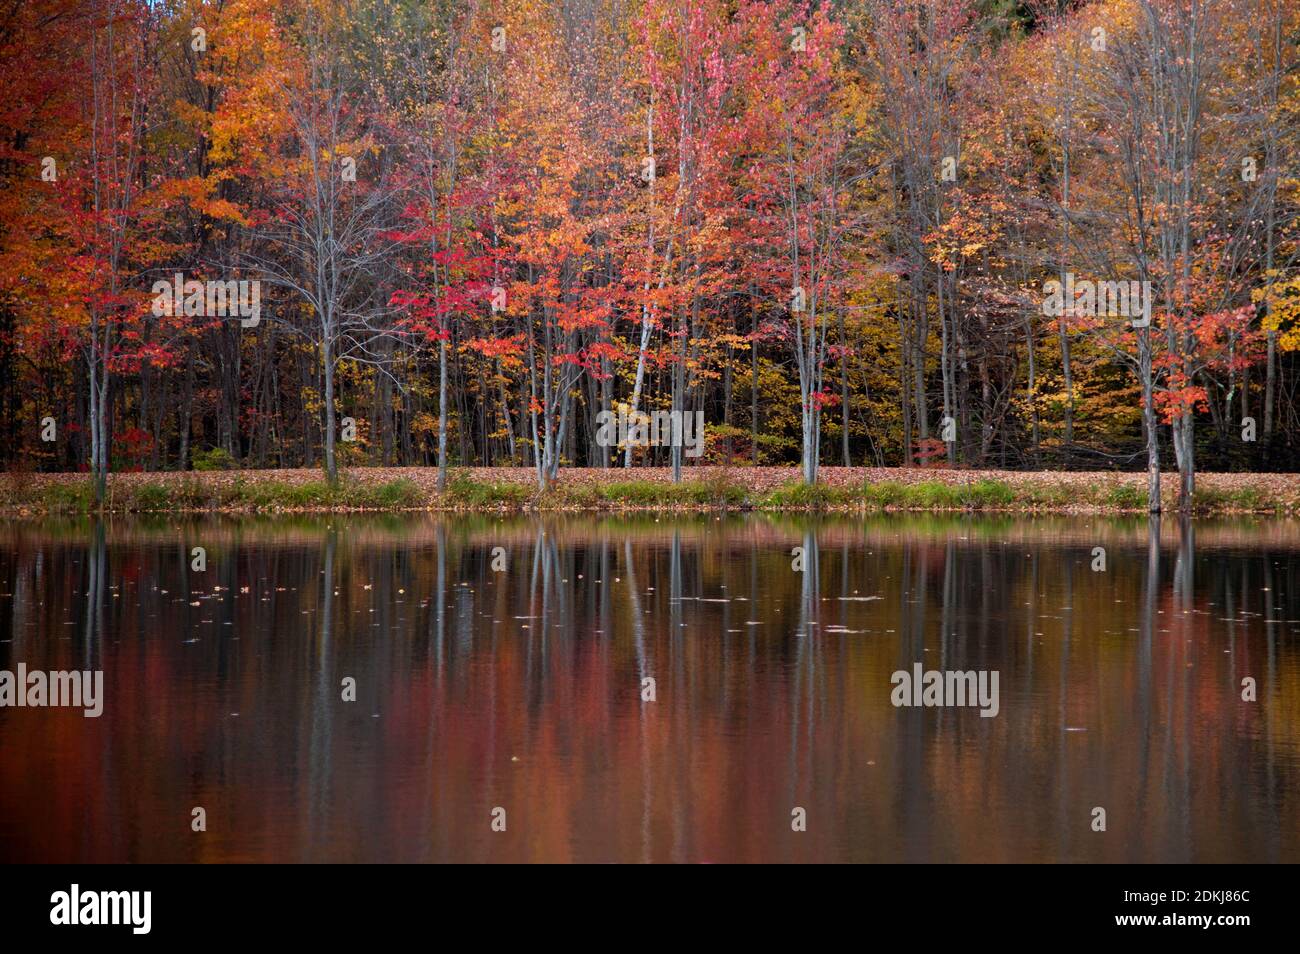 Fall colors reflected on a lake in New England, Maine, United States Stock Photo